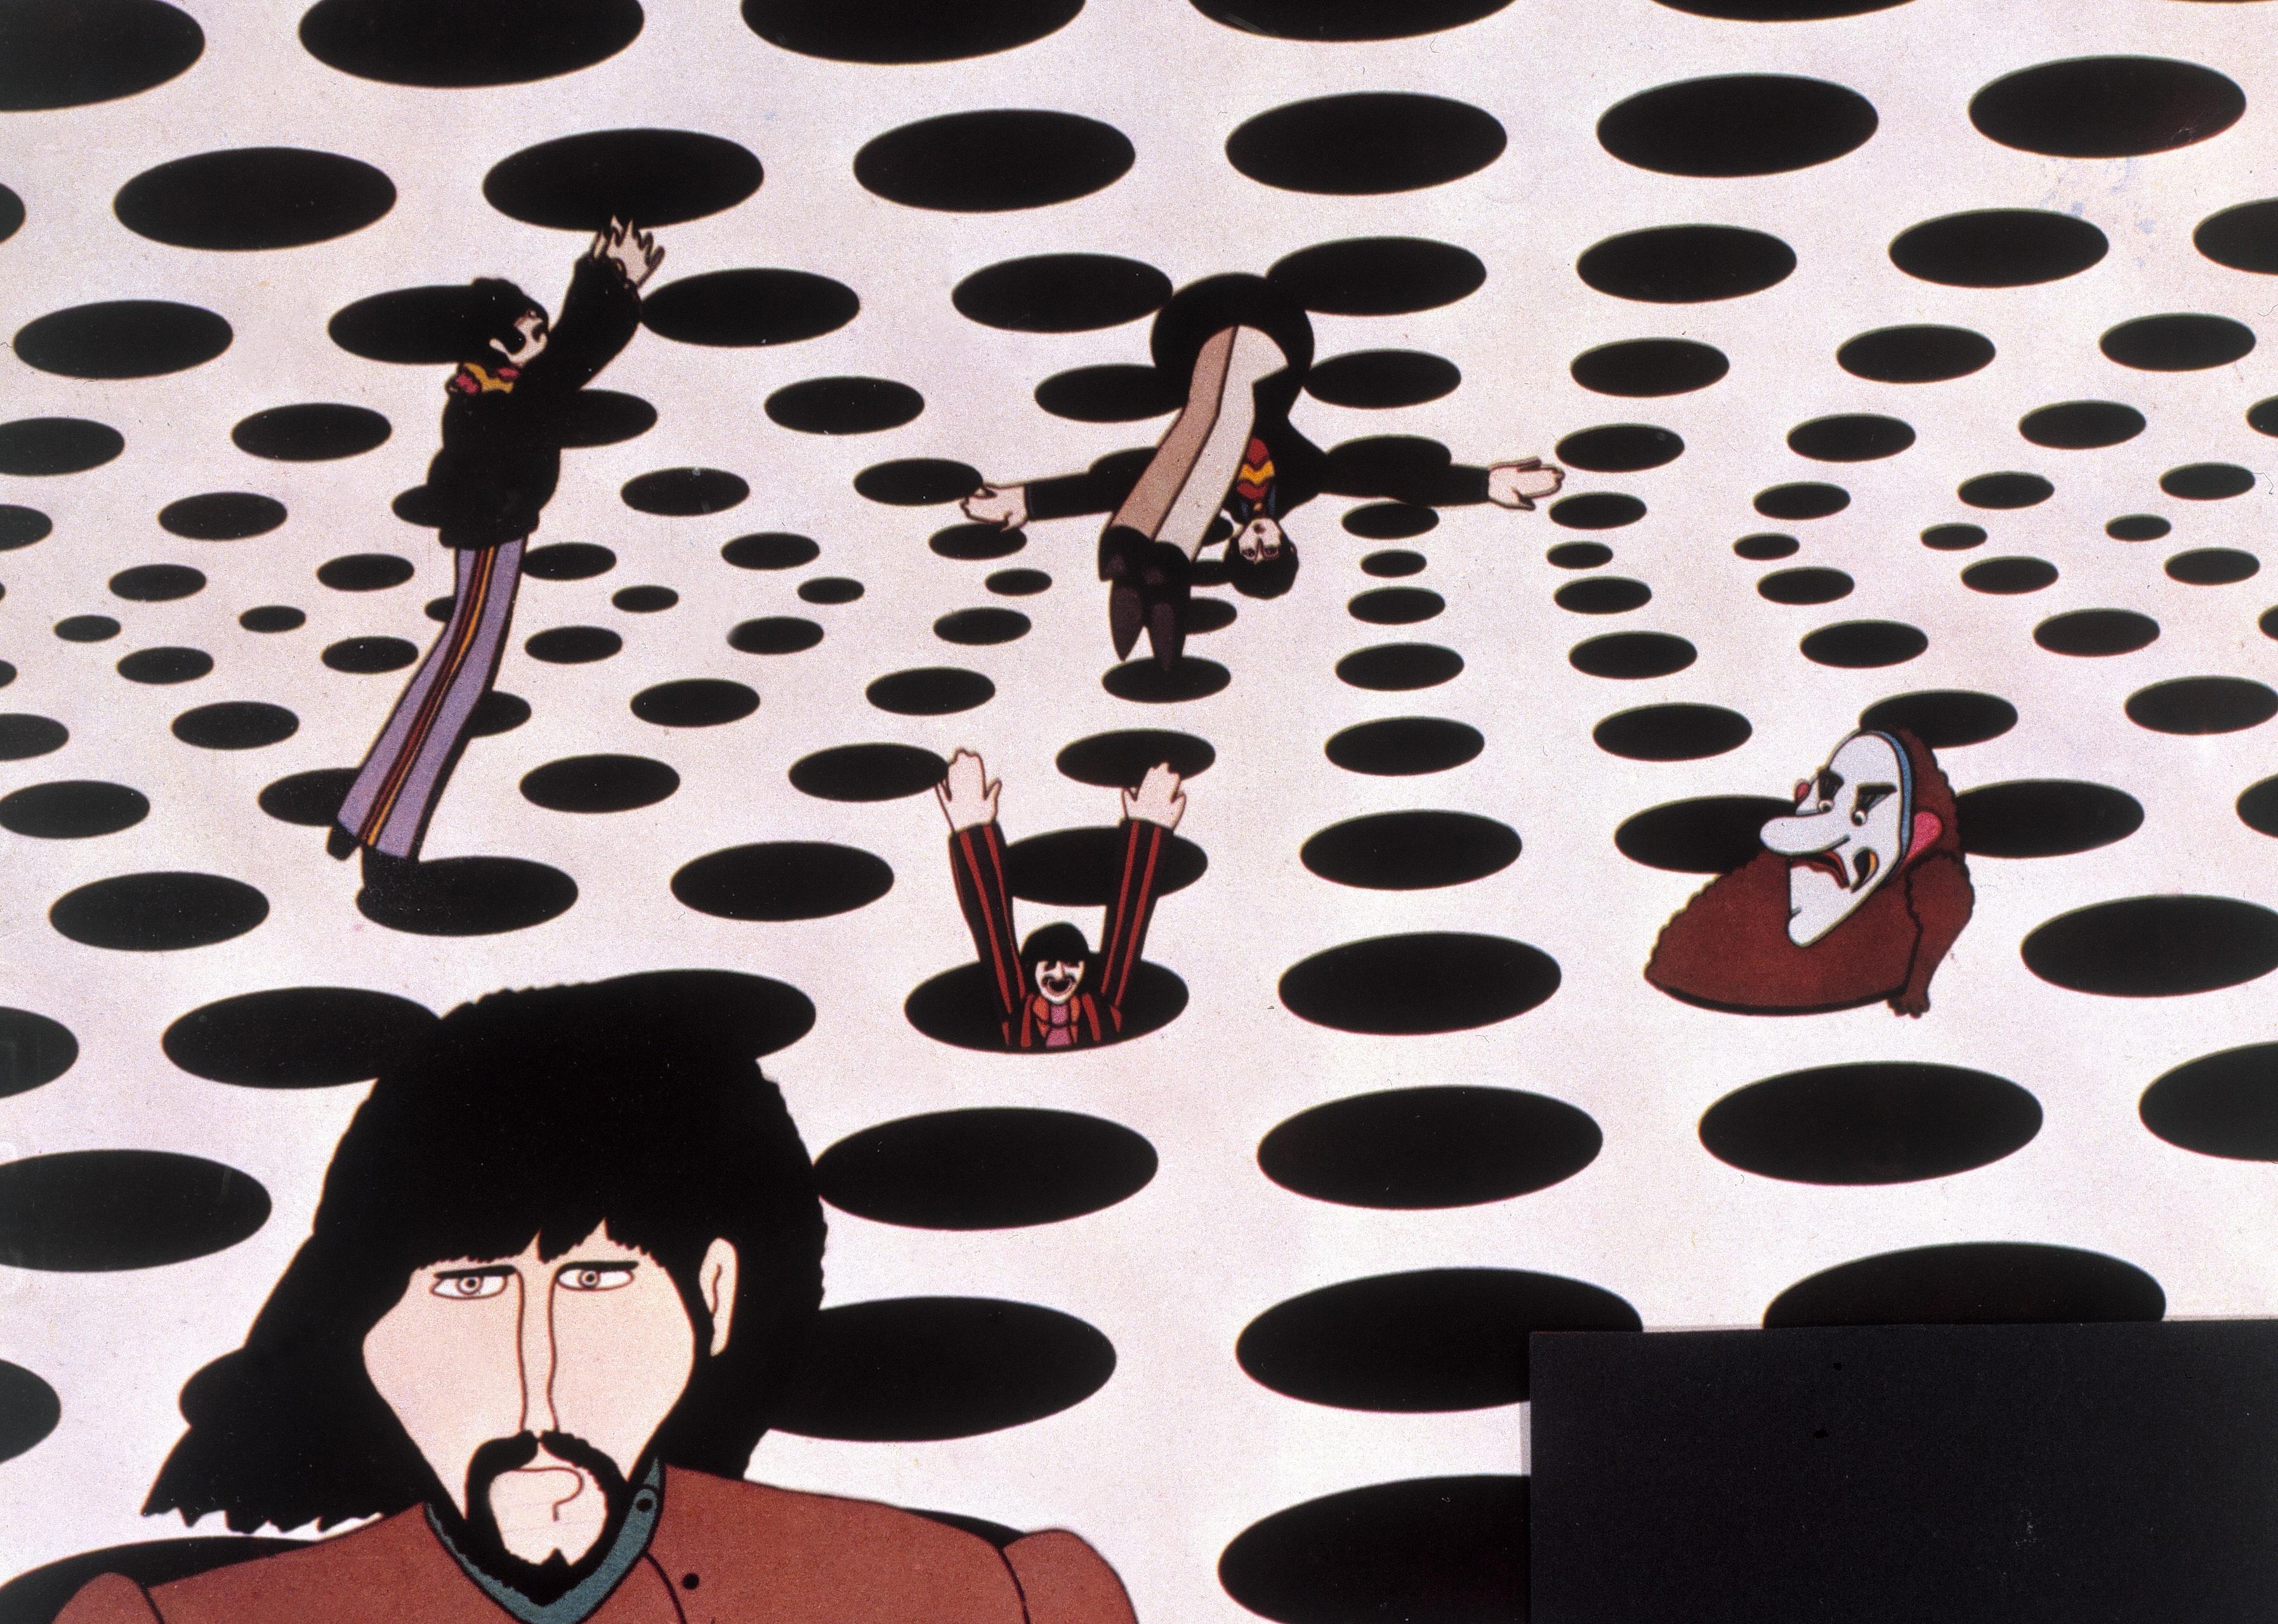 An illustrated scene from Yellow Submarine.